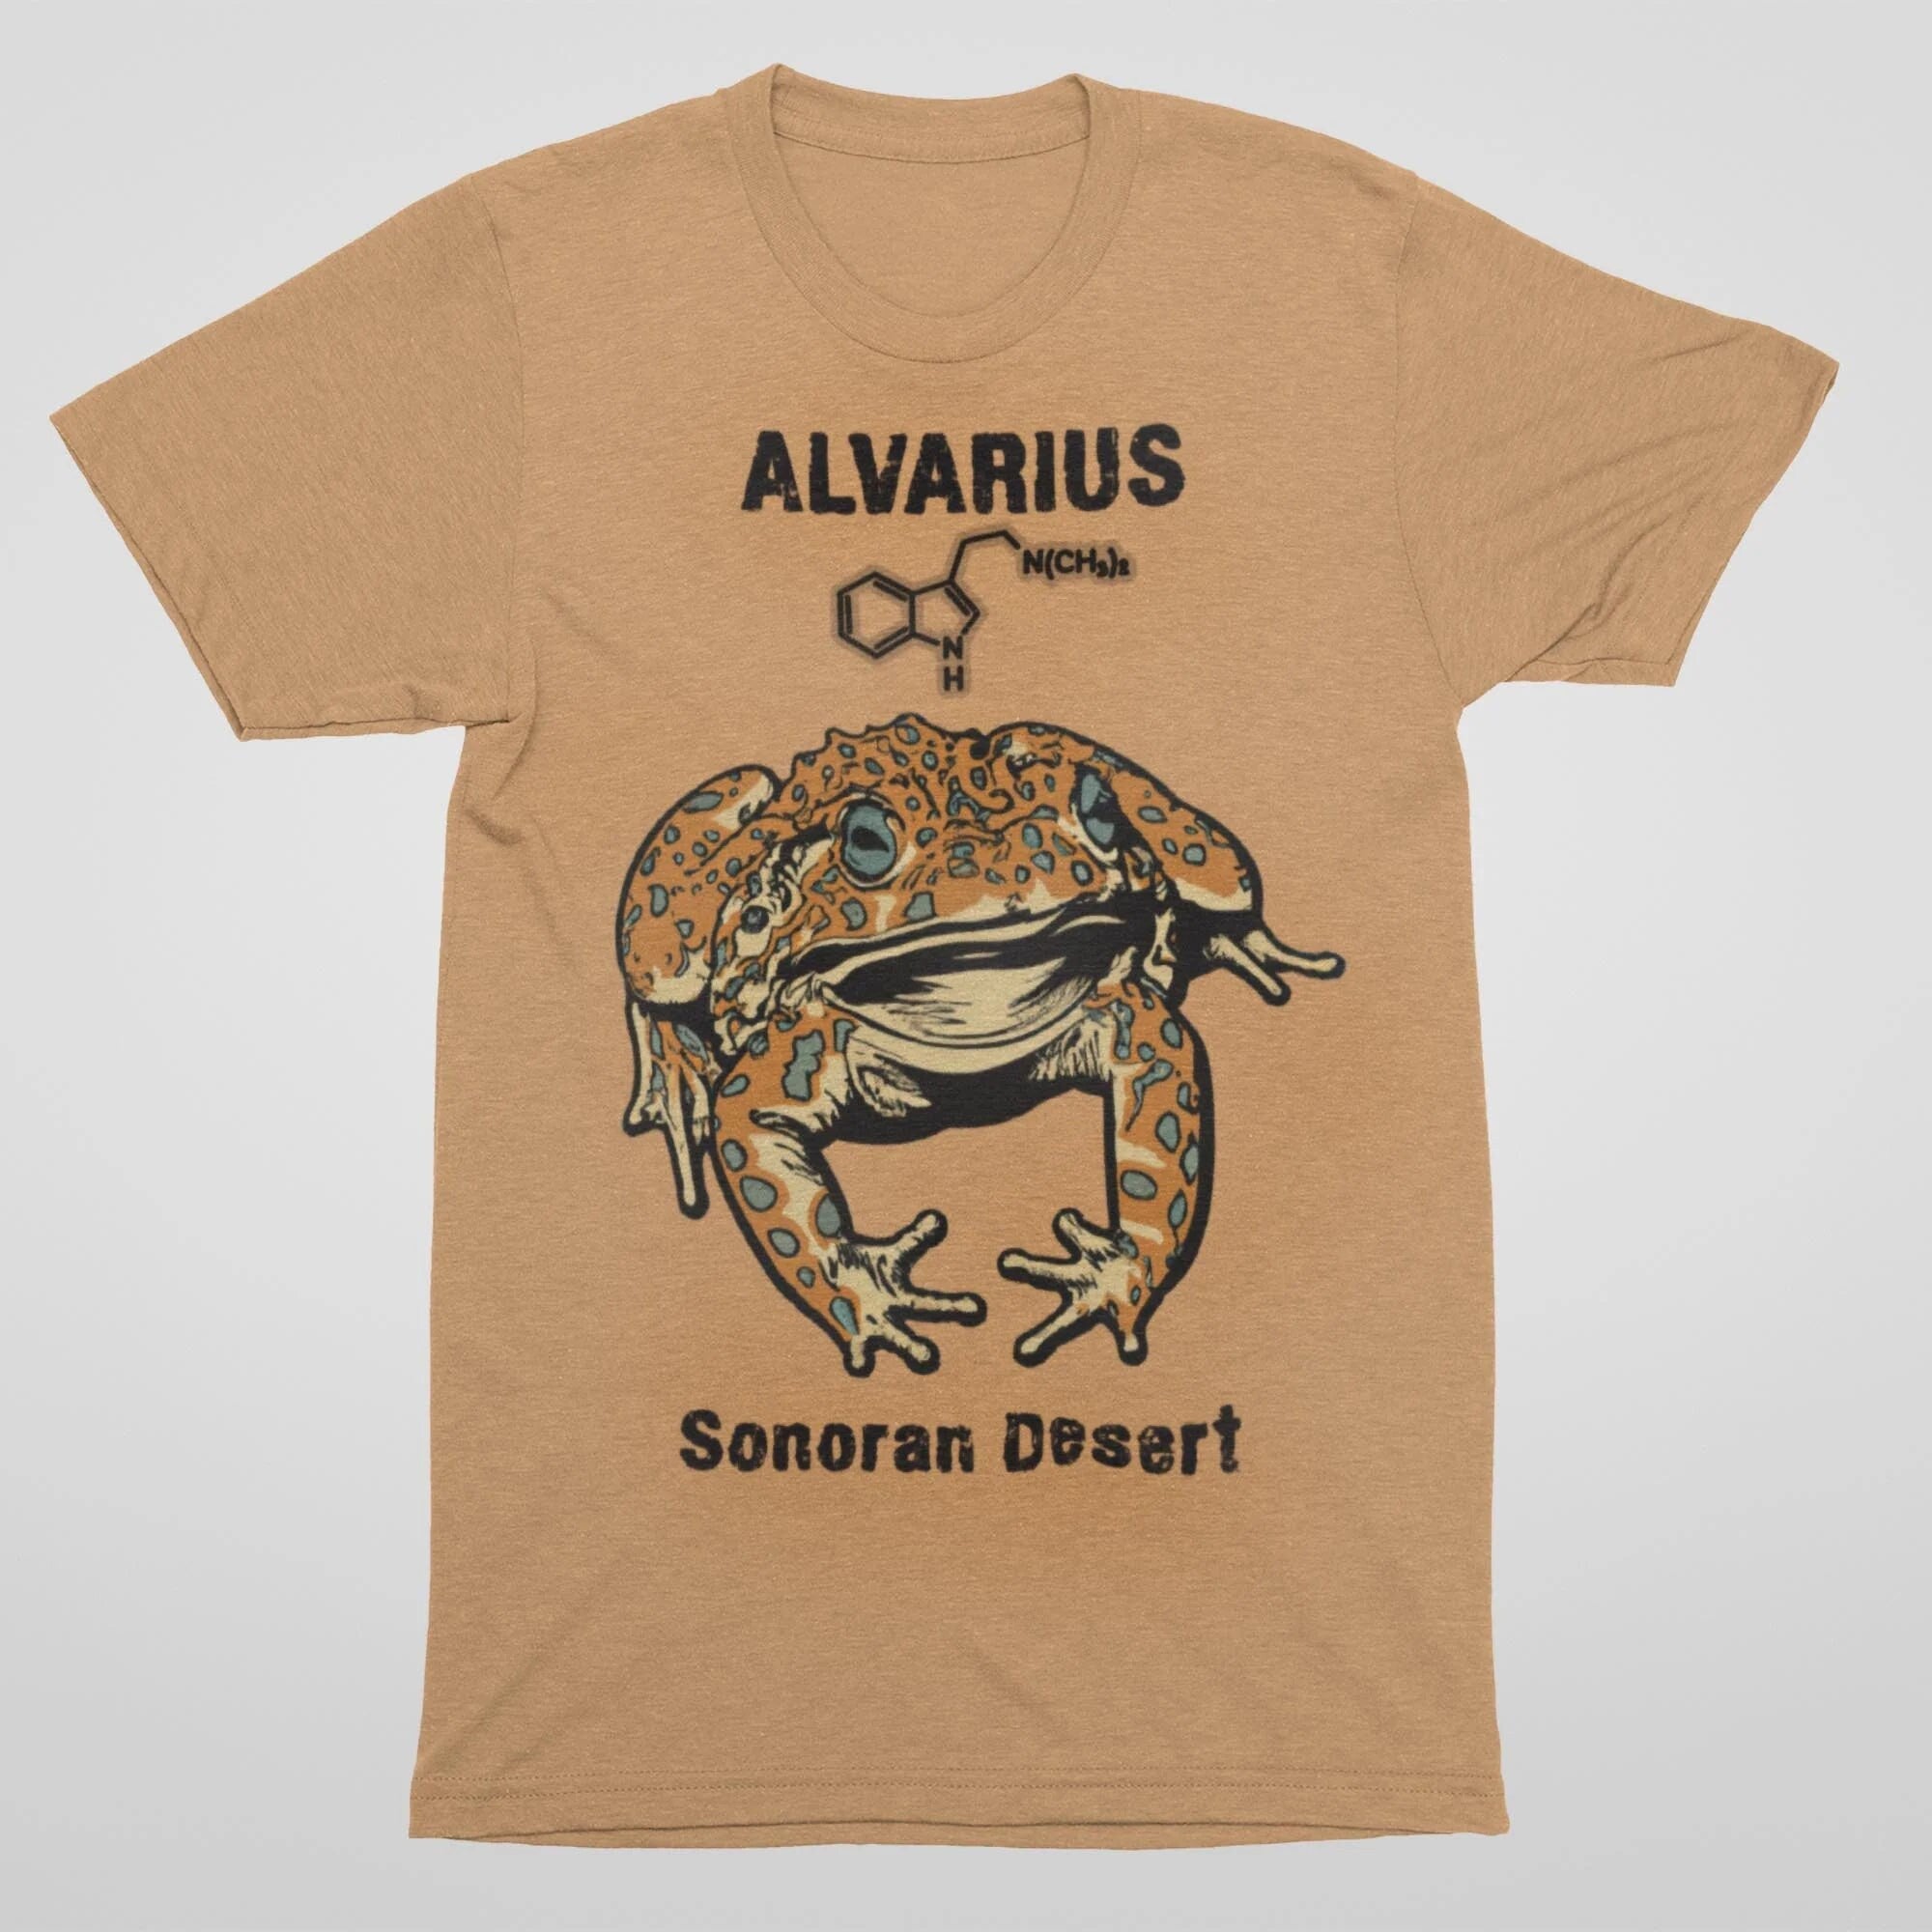 S / Old Gold Bufo Alvarius Toad, The Sonoran Desert 5-MeO DMT Psychedelic Frog, Trippy Ayahuasca Weed Chemistry | 420 Spiritual Digital Art T-Shirt Tee